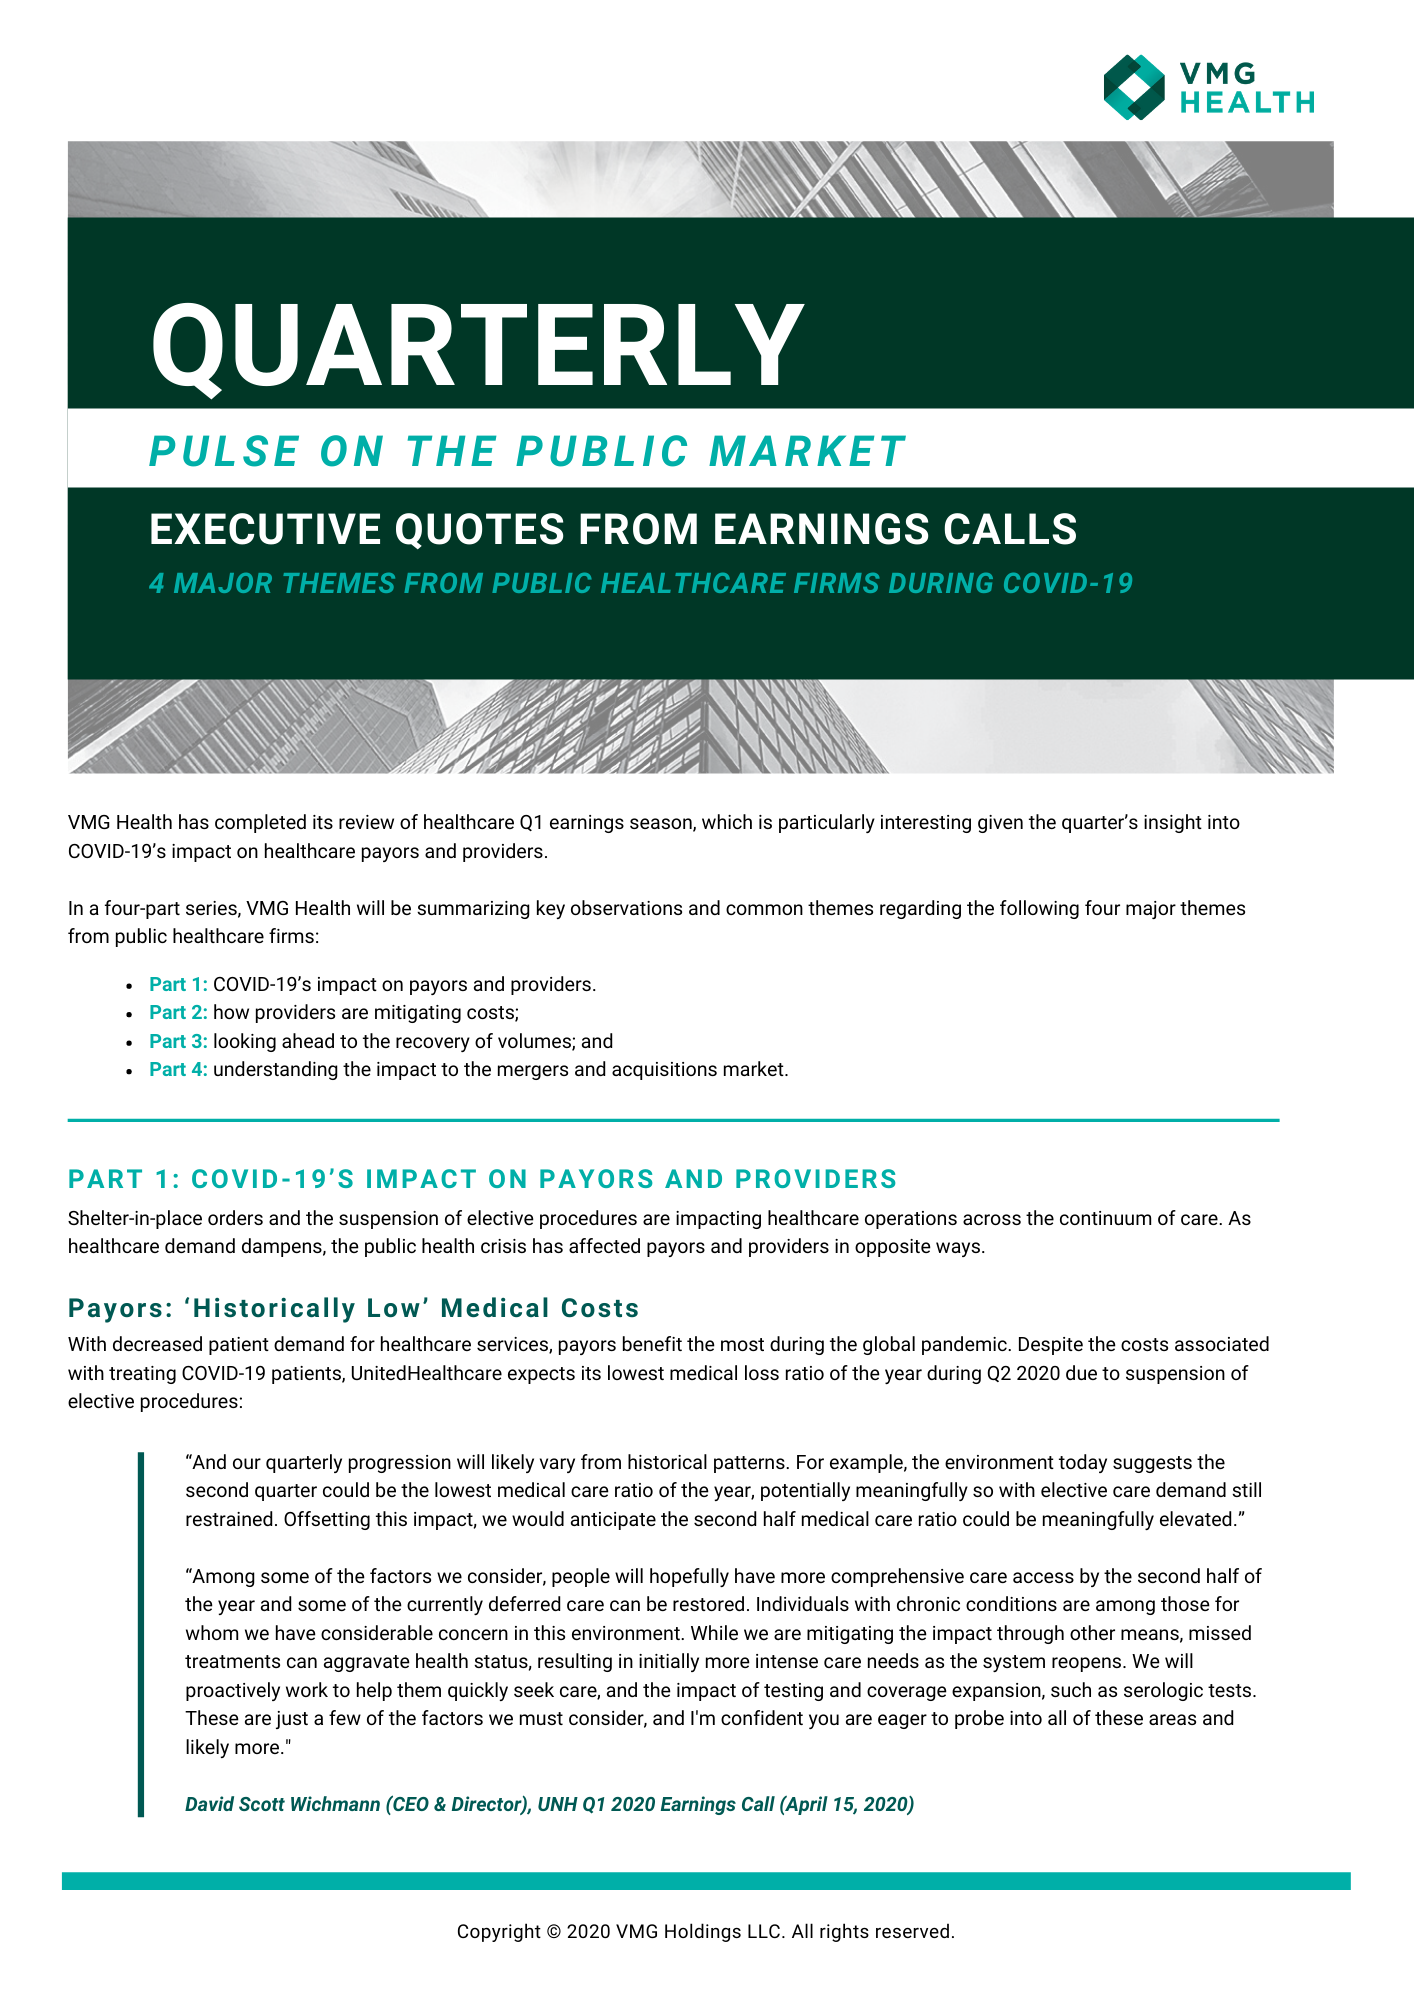 Executive Quotes from Earnings Calls: 4 Major Themes from Public Healthcare Firms During COVID-19